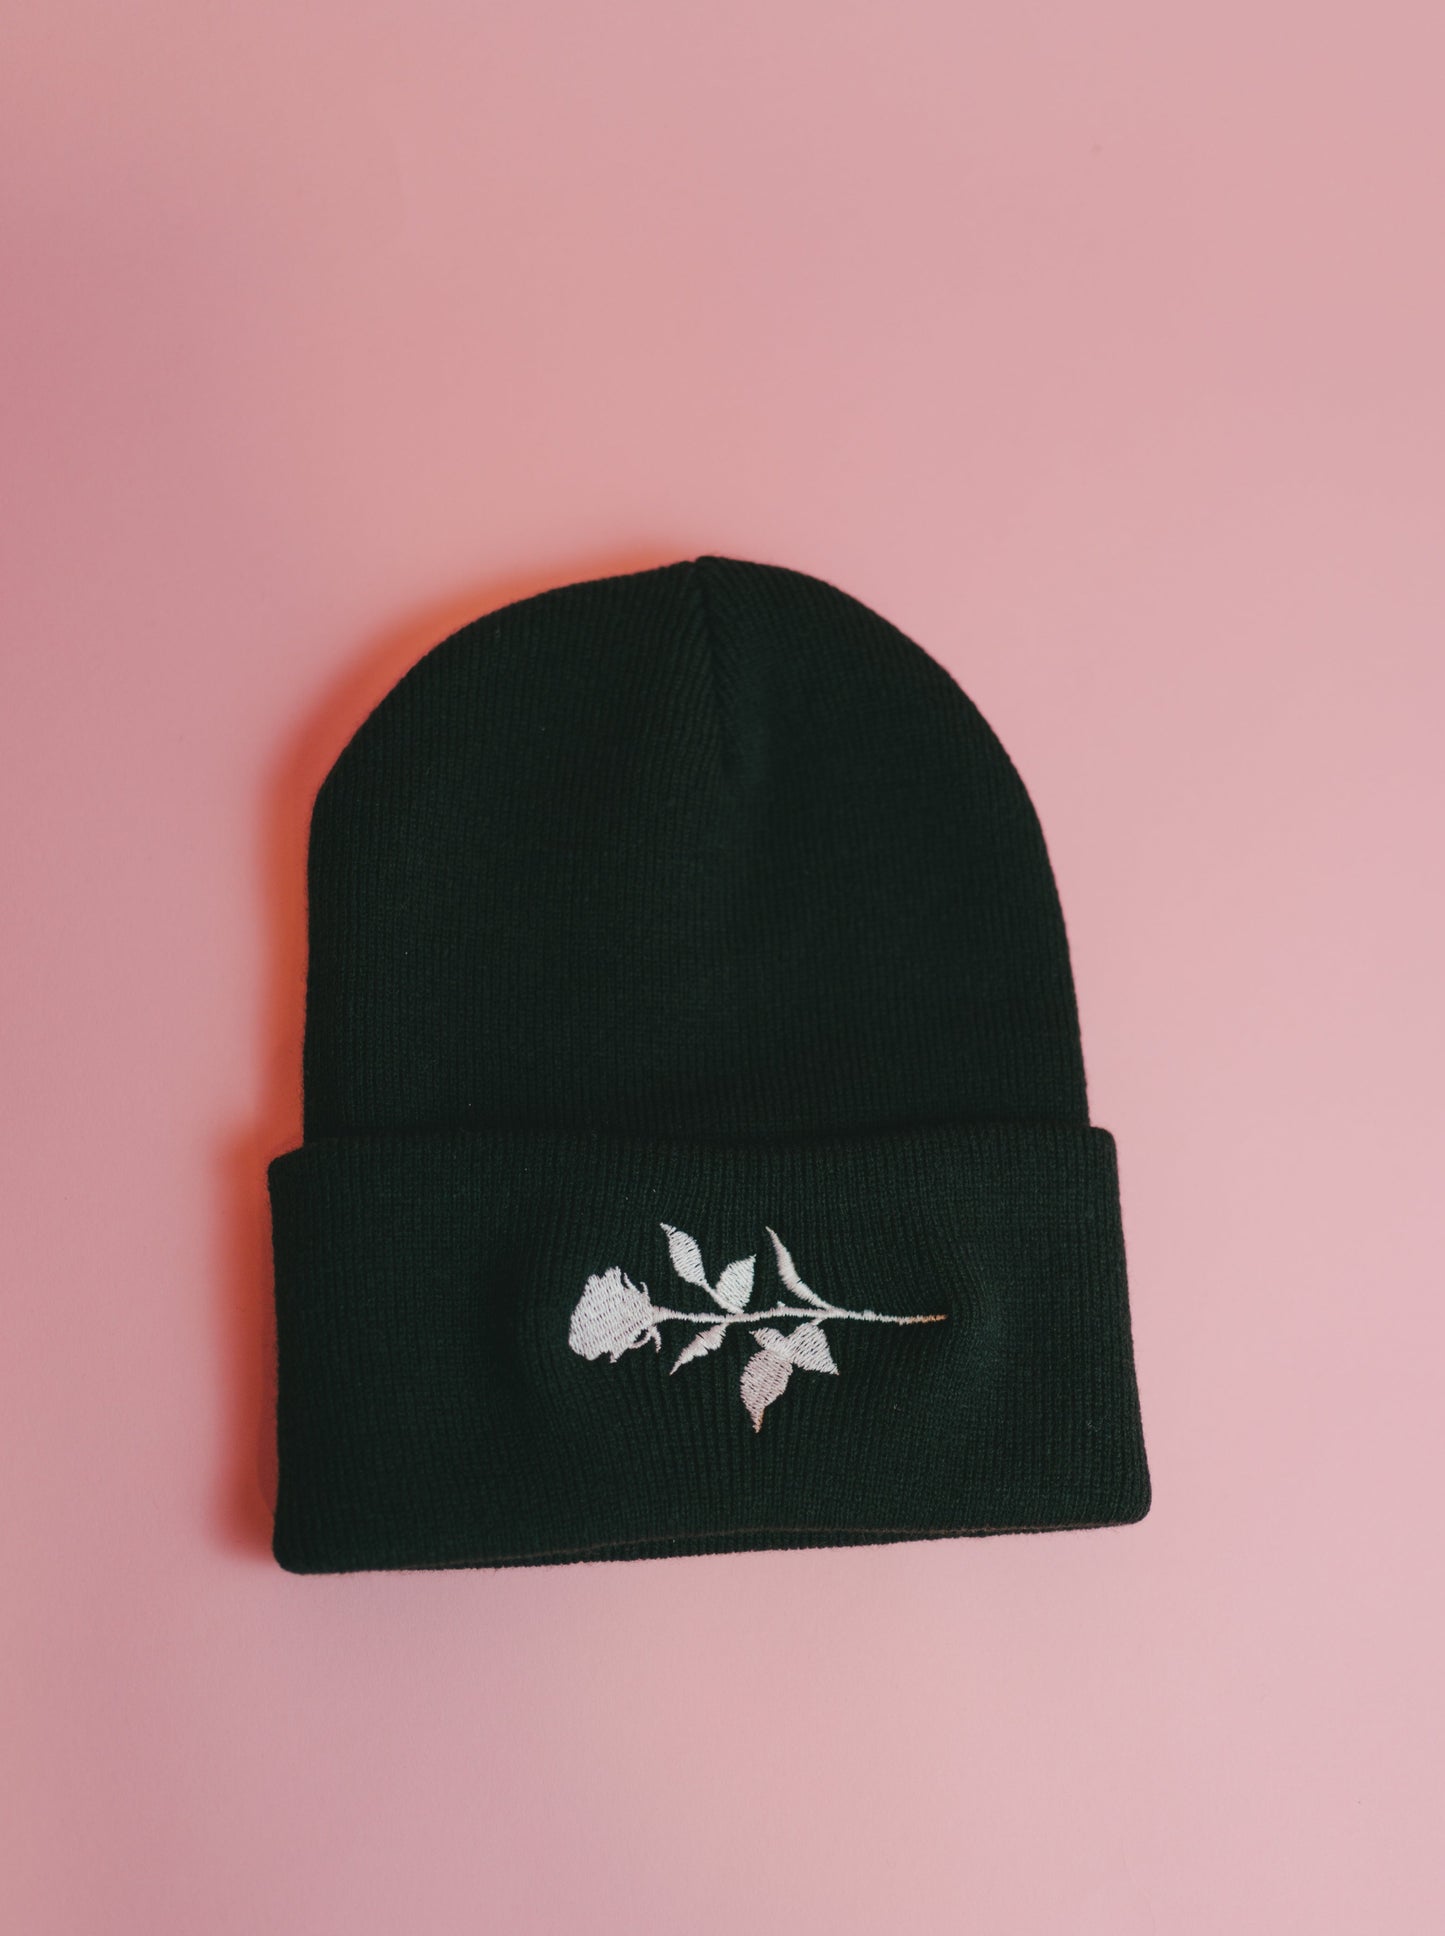 rose silhouette embroidered toque